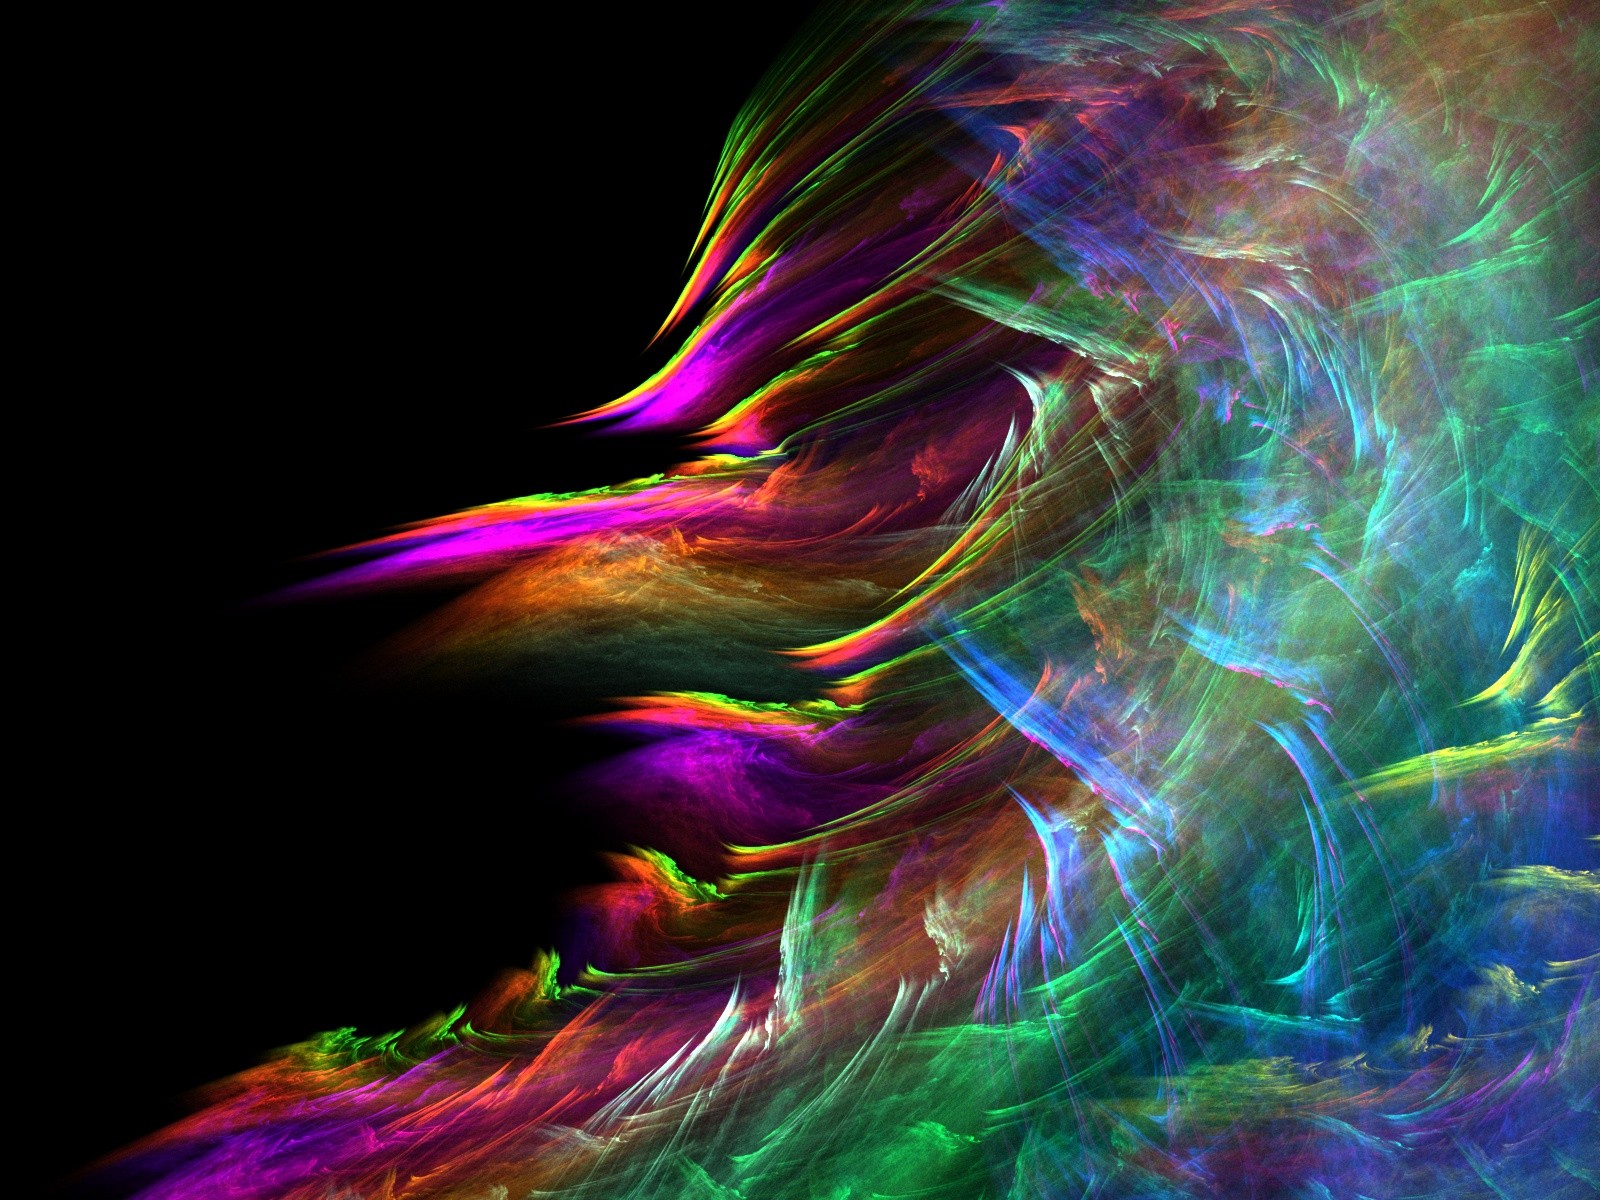  trippy desktop backgrounds Set any of these wallpapers on your screen 1600x1200